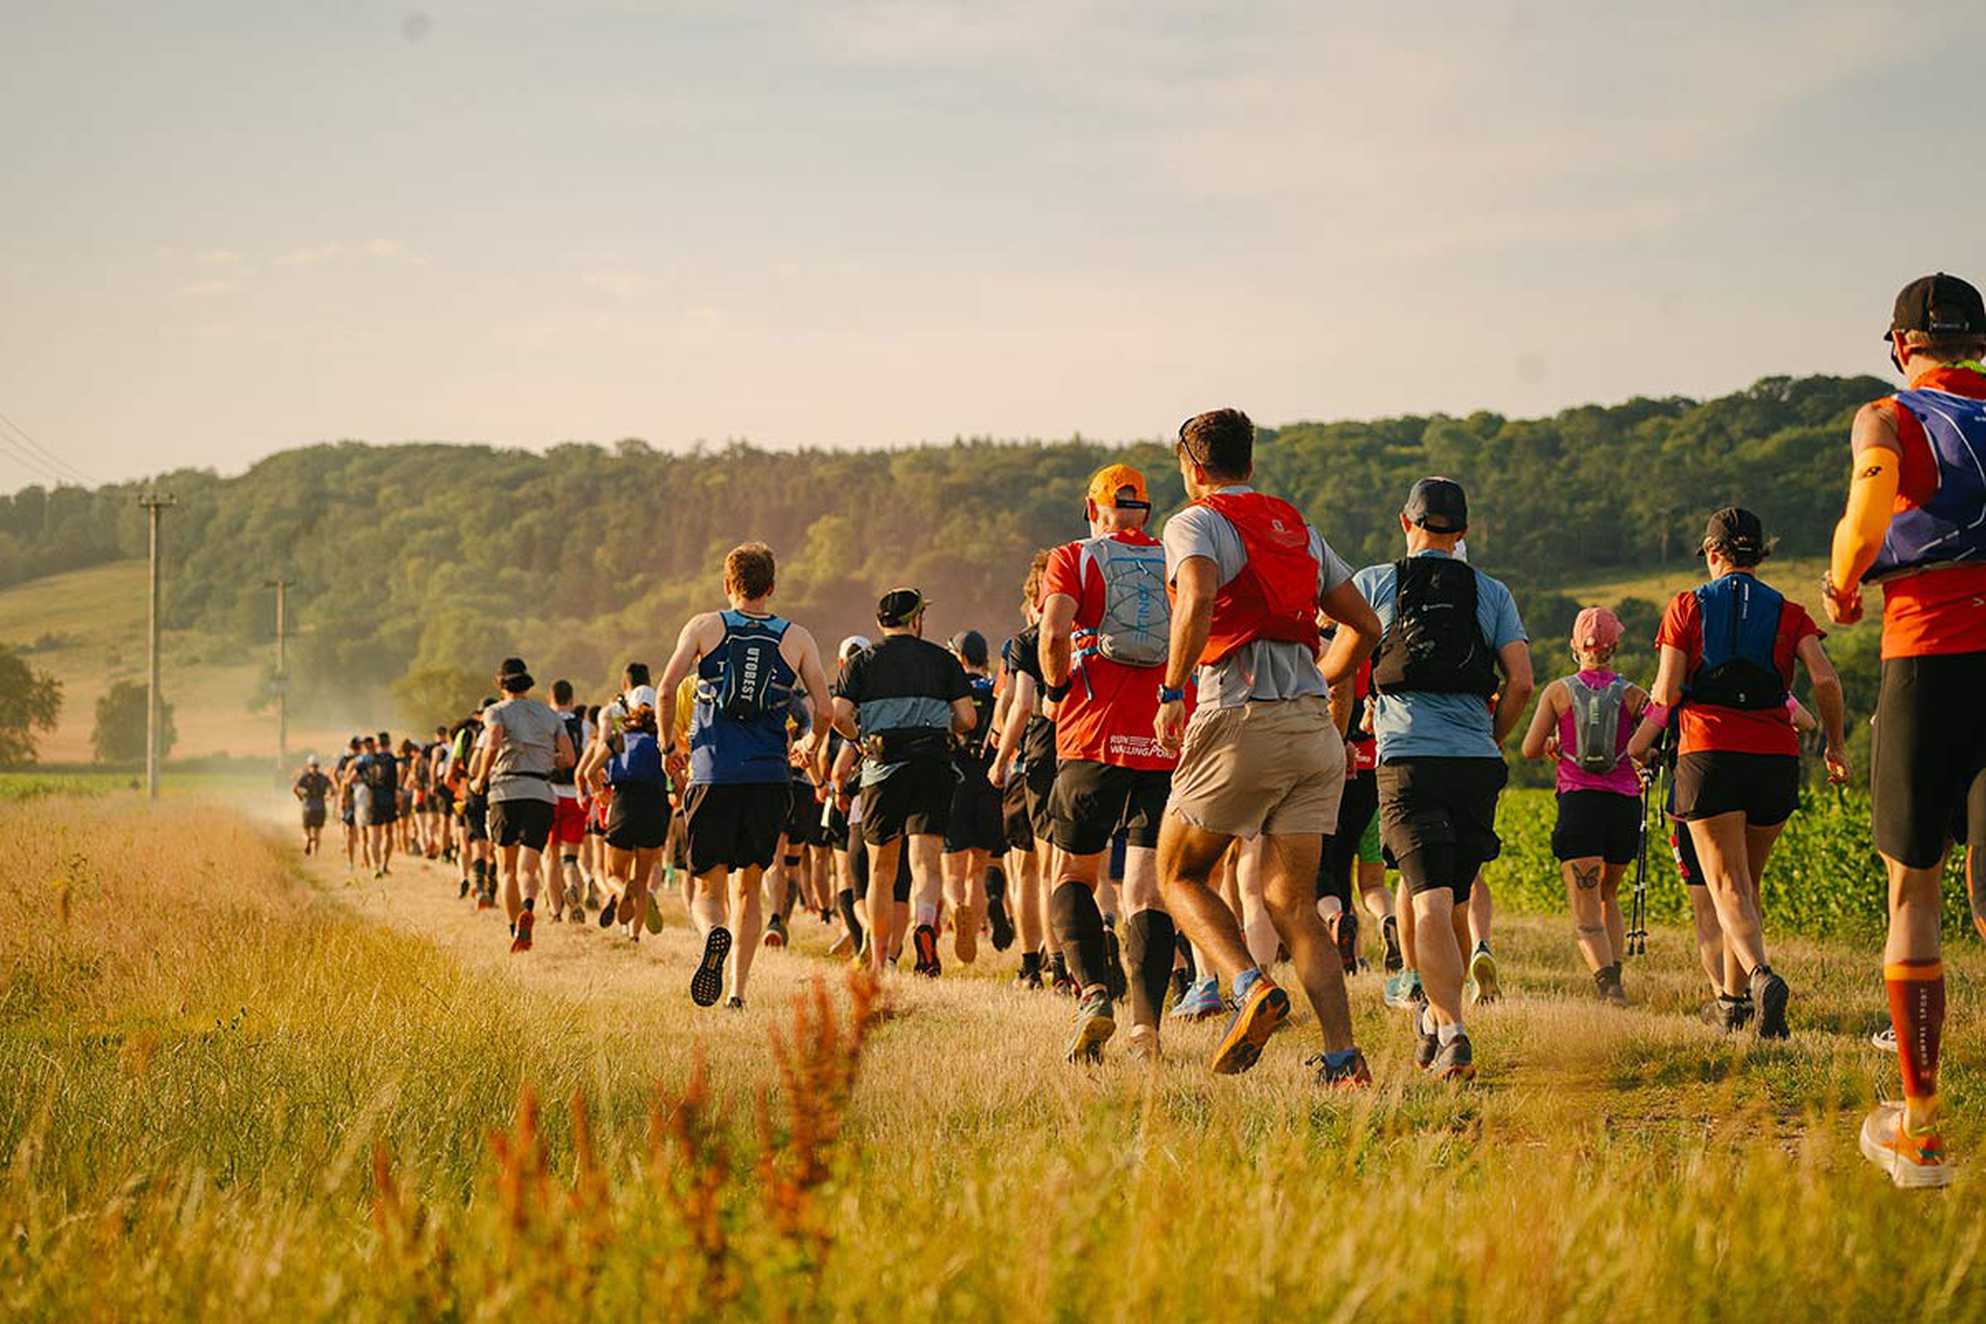 A beautifully lit photo showing a rear view of Race to the Stones participants making their way along a gravel track in the midst of the countryside.